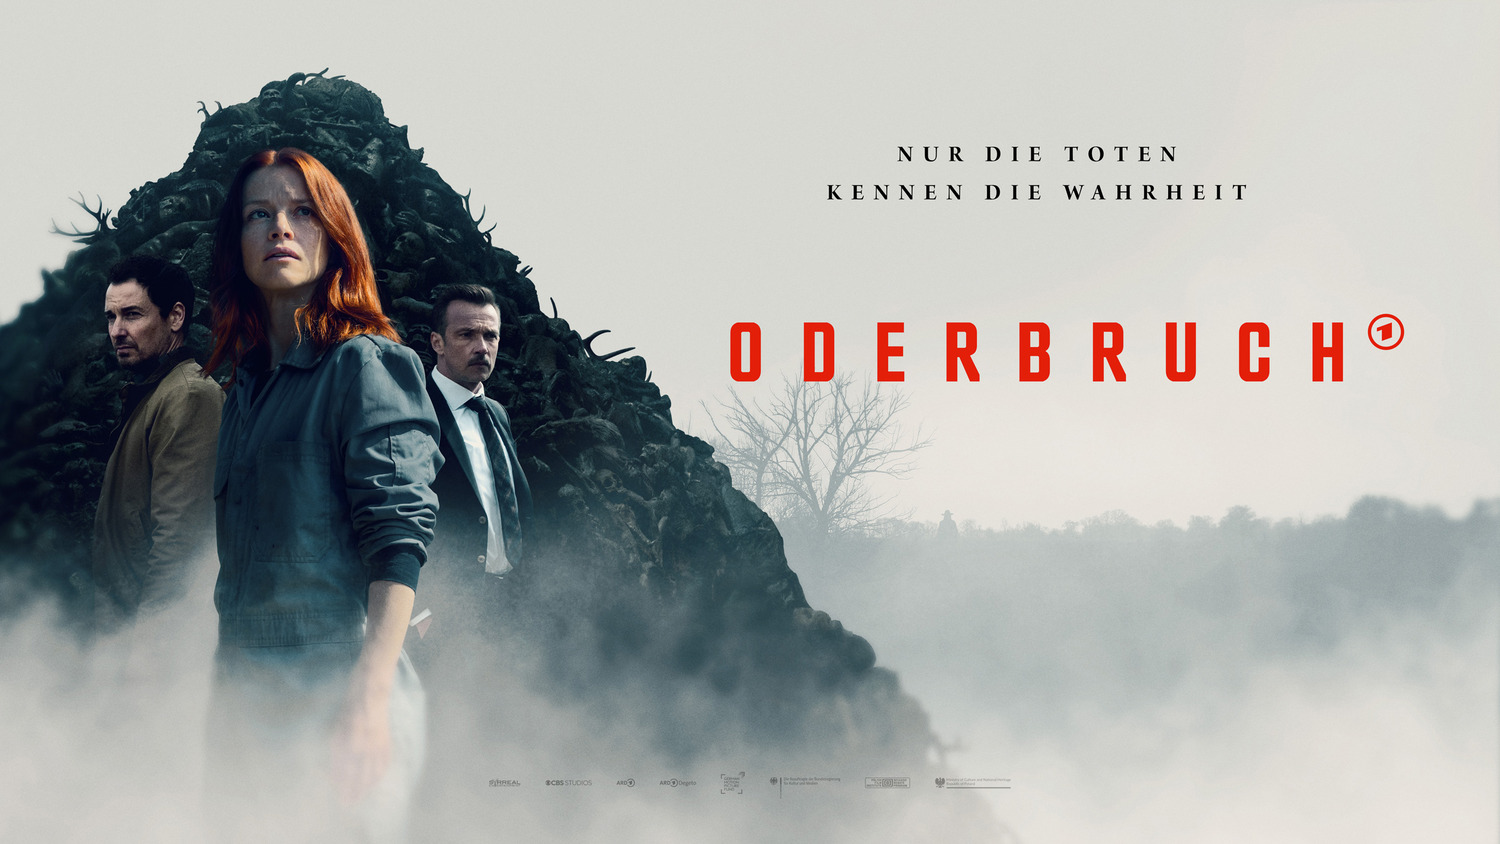 Extra Large TV Poster Image for Oderbruch (#5 of 5)